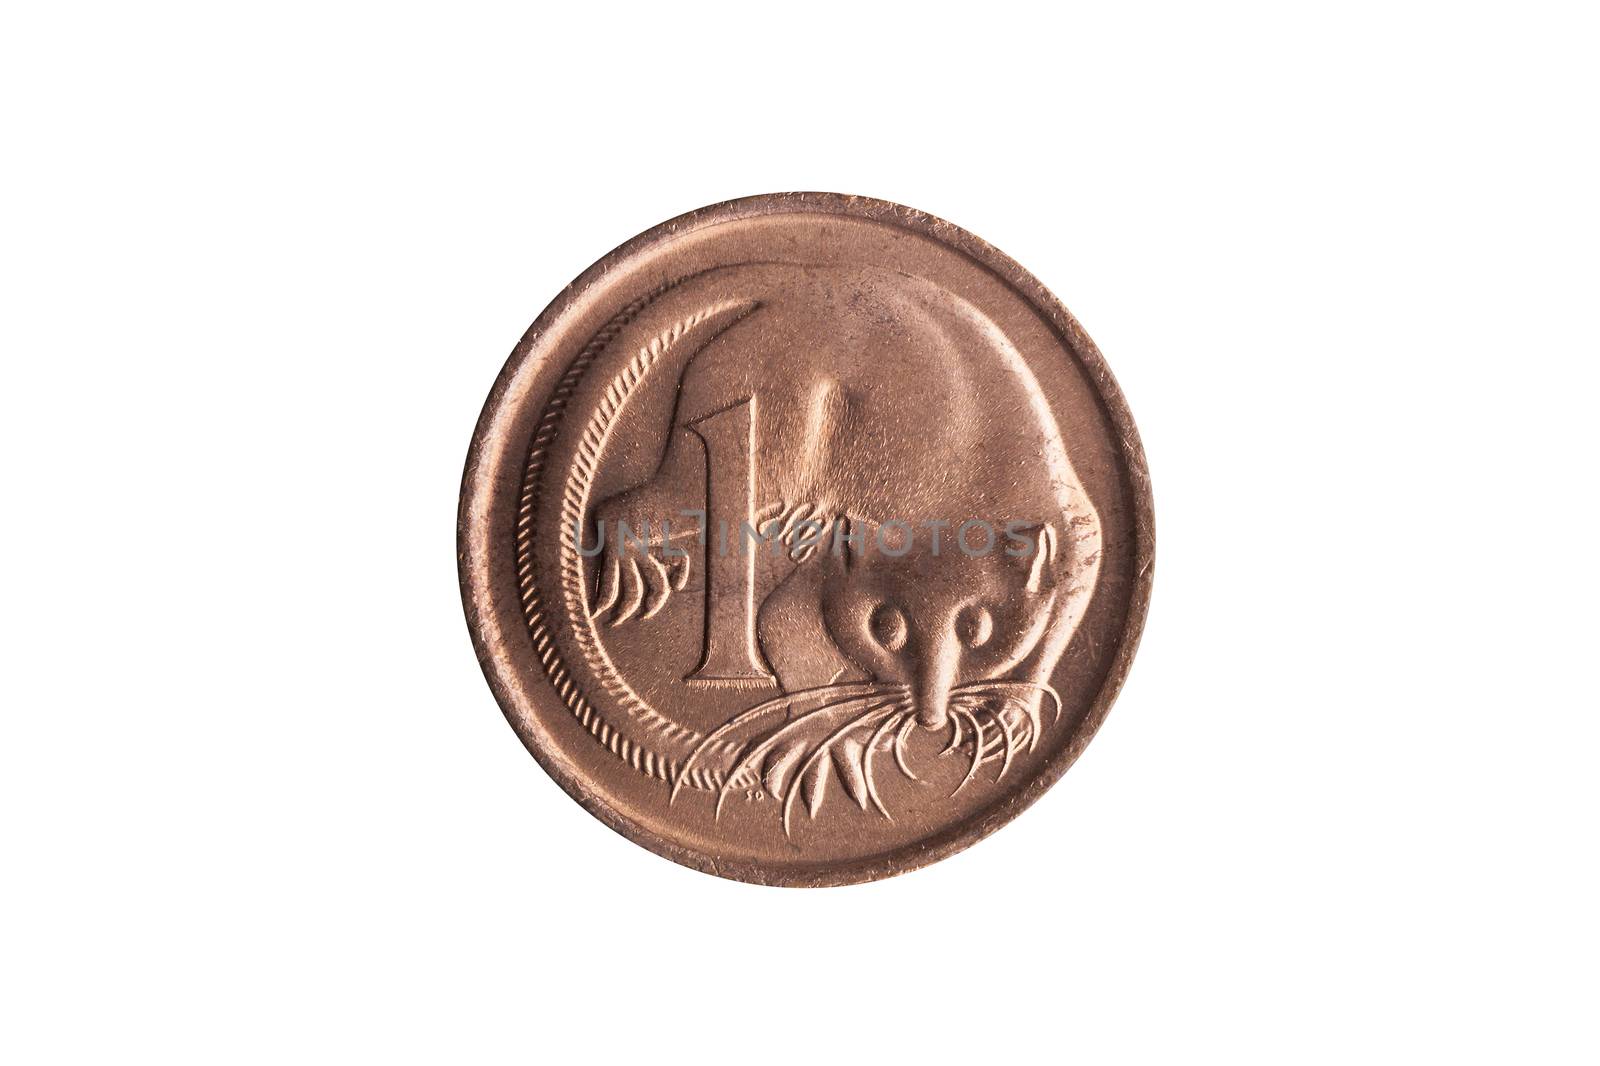 Australia one cent penny coin with an image of a Feathertail Glider possum cut out and isolated on a white background